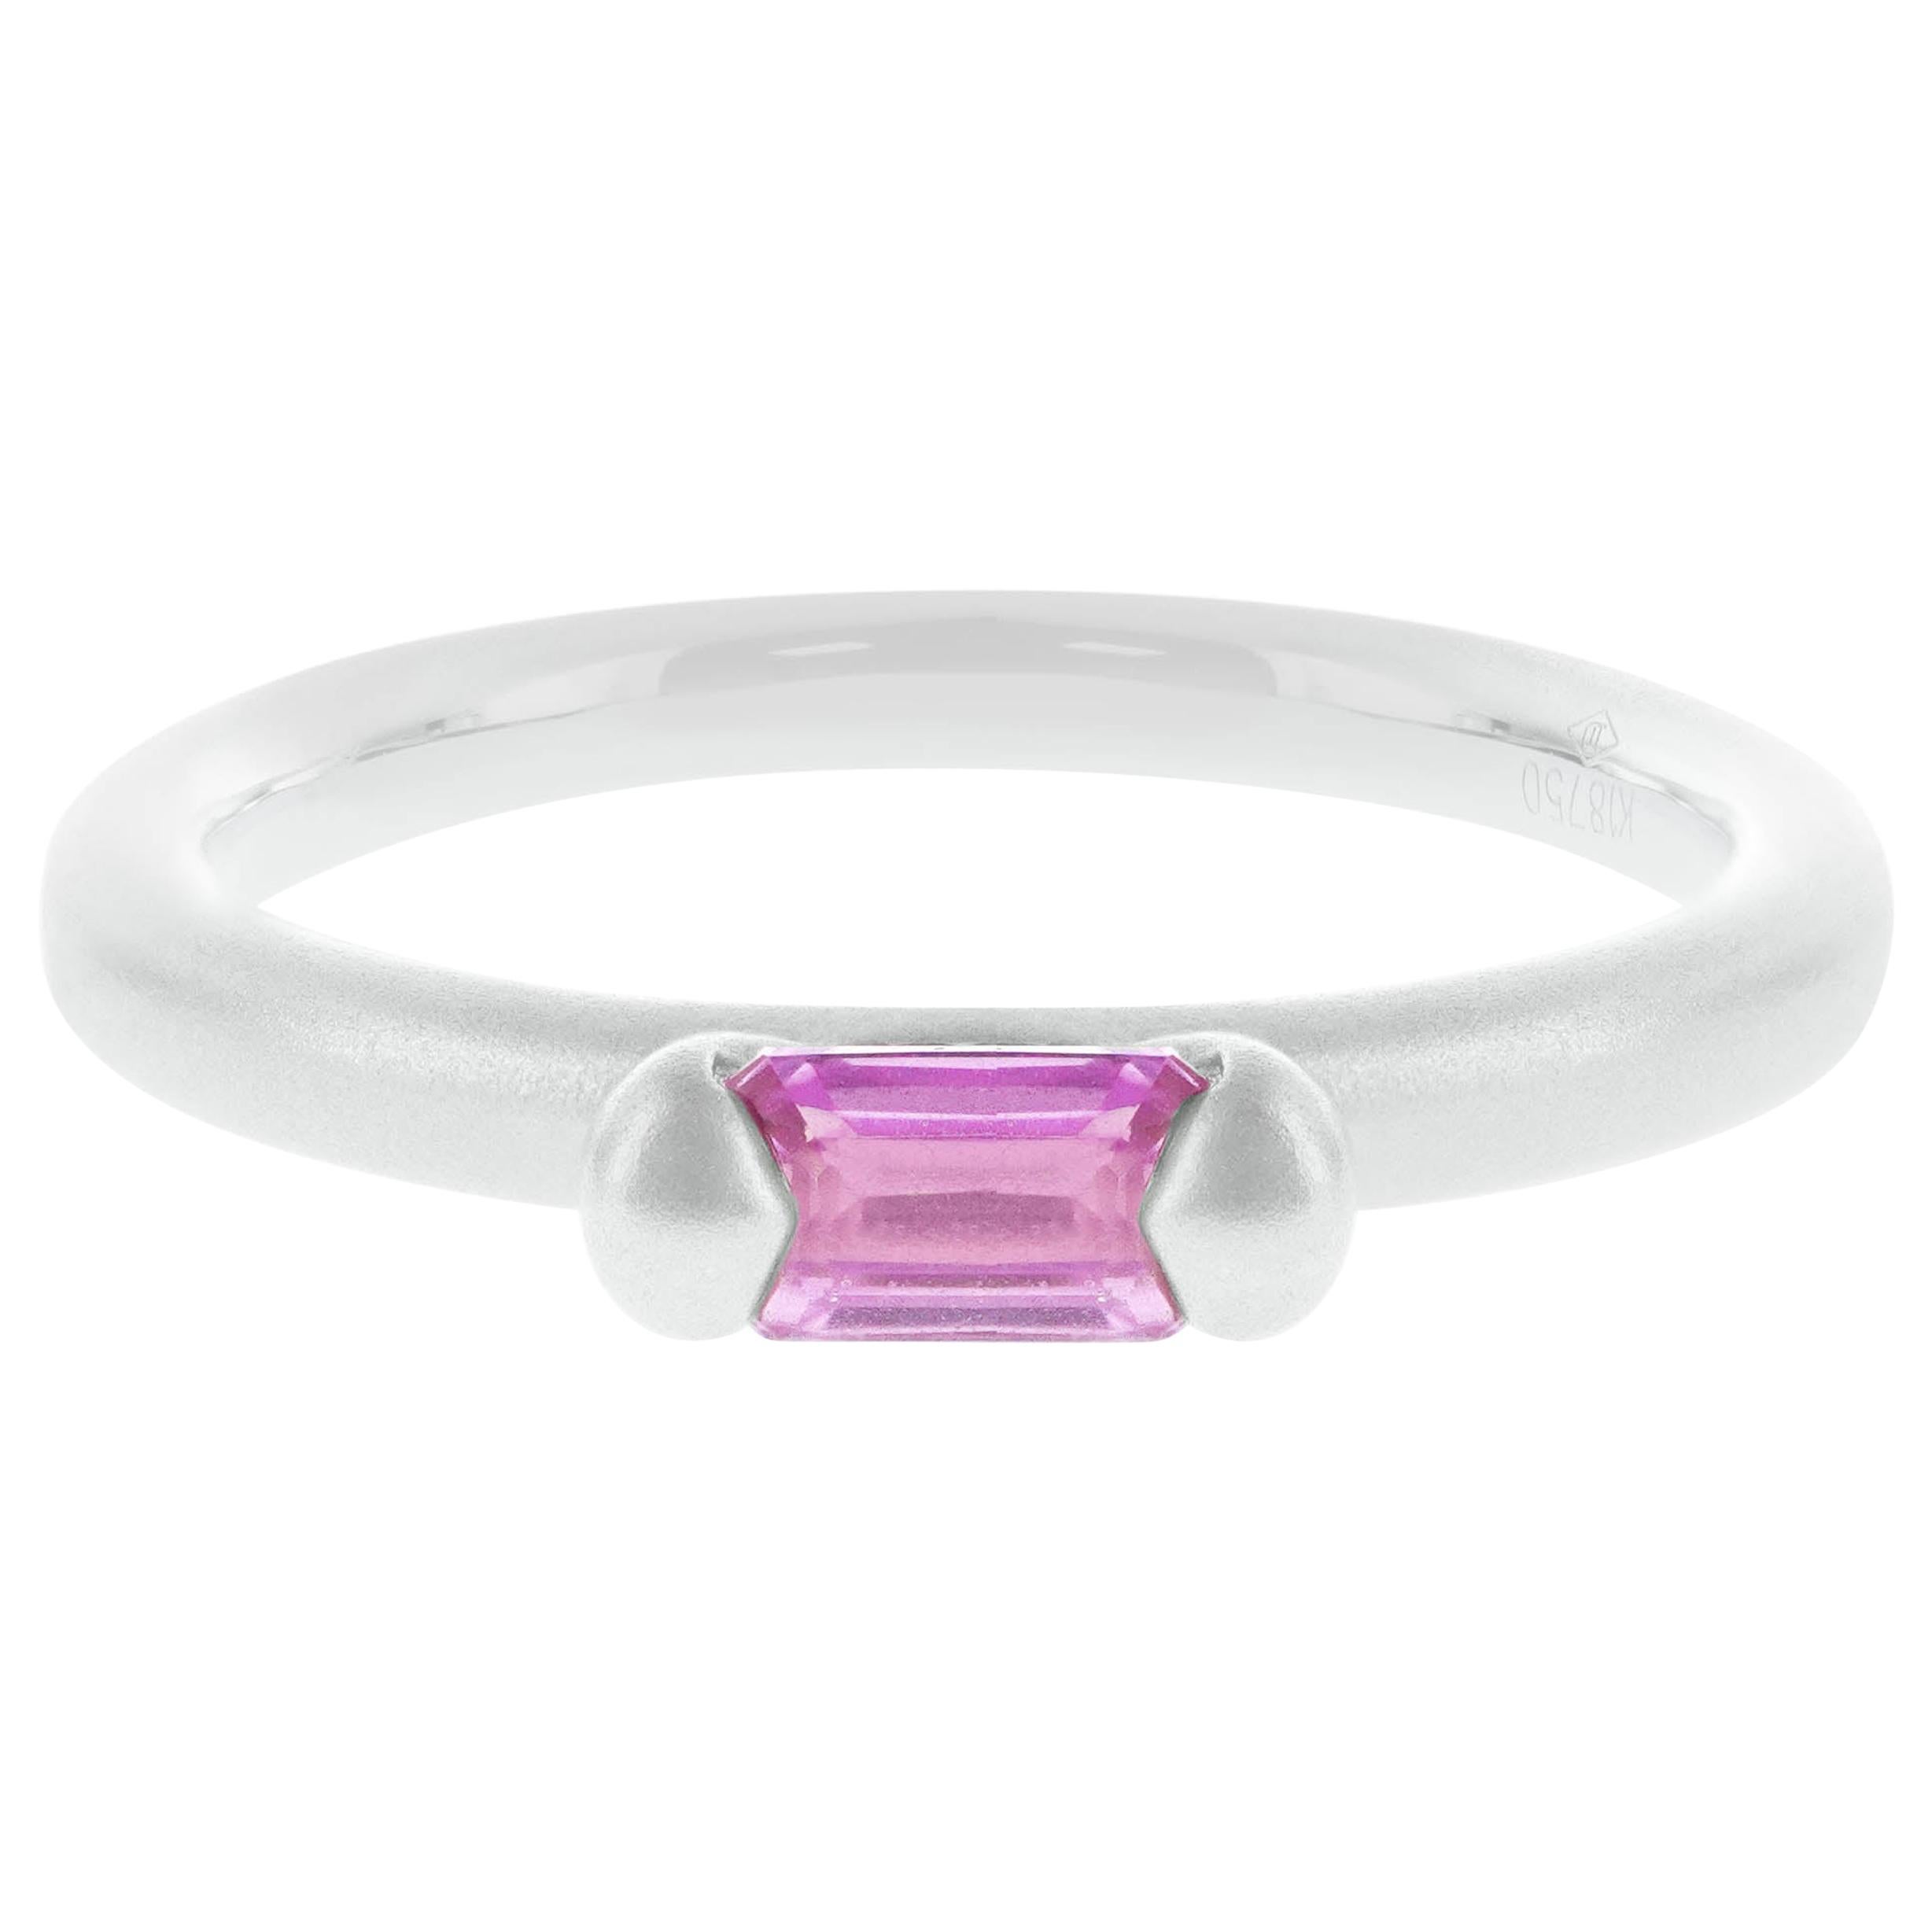 0.32 carat of super saturated hot pink sapphire is set in this 18K matt finish gold ring. The ring is hand made in Hong Kong and the gold weighs 3.31 grams. The ring can be worn as a trio ring or can be worn individually. 